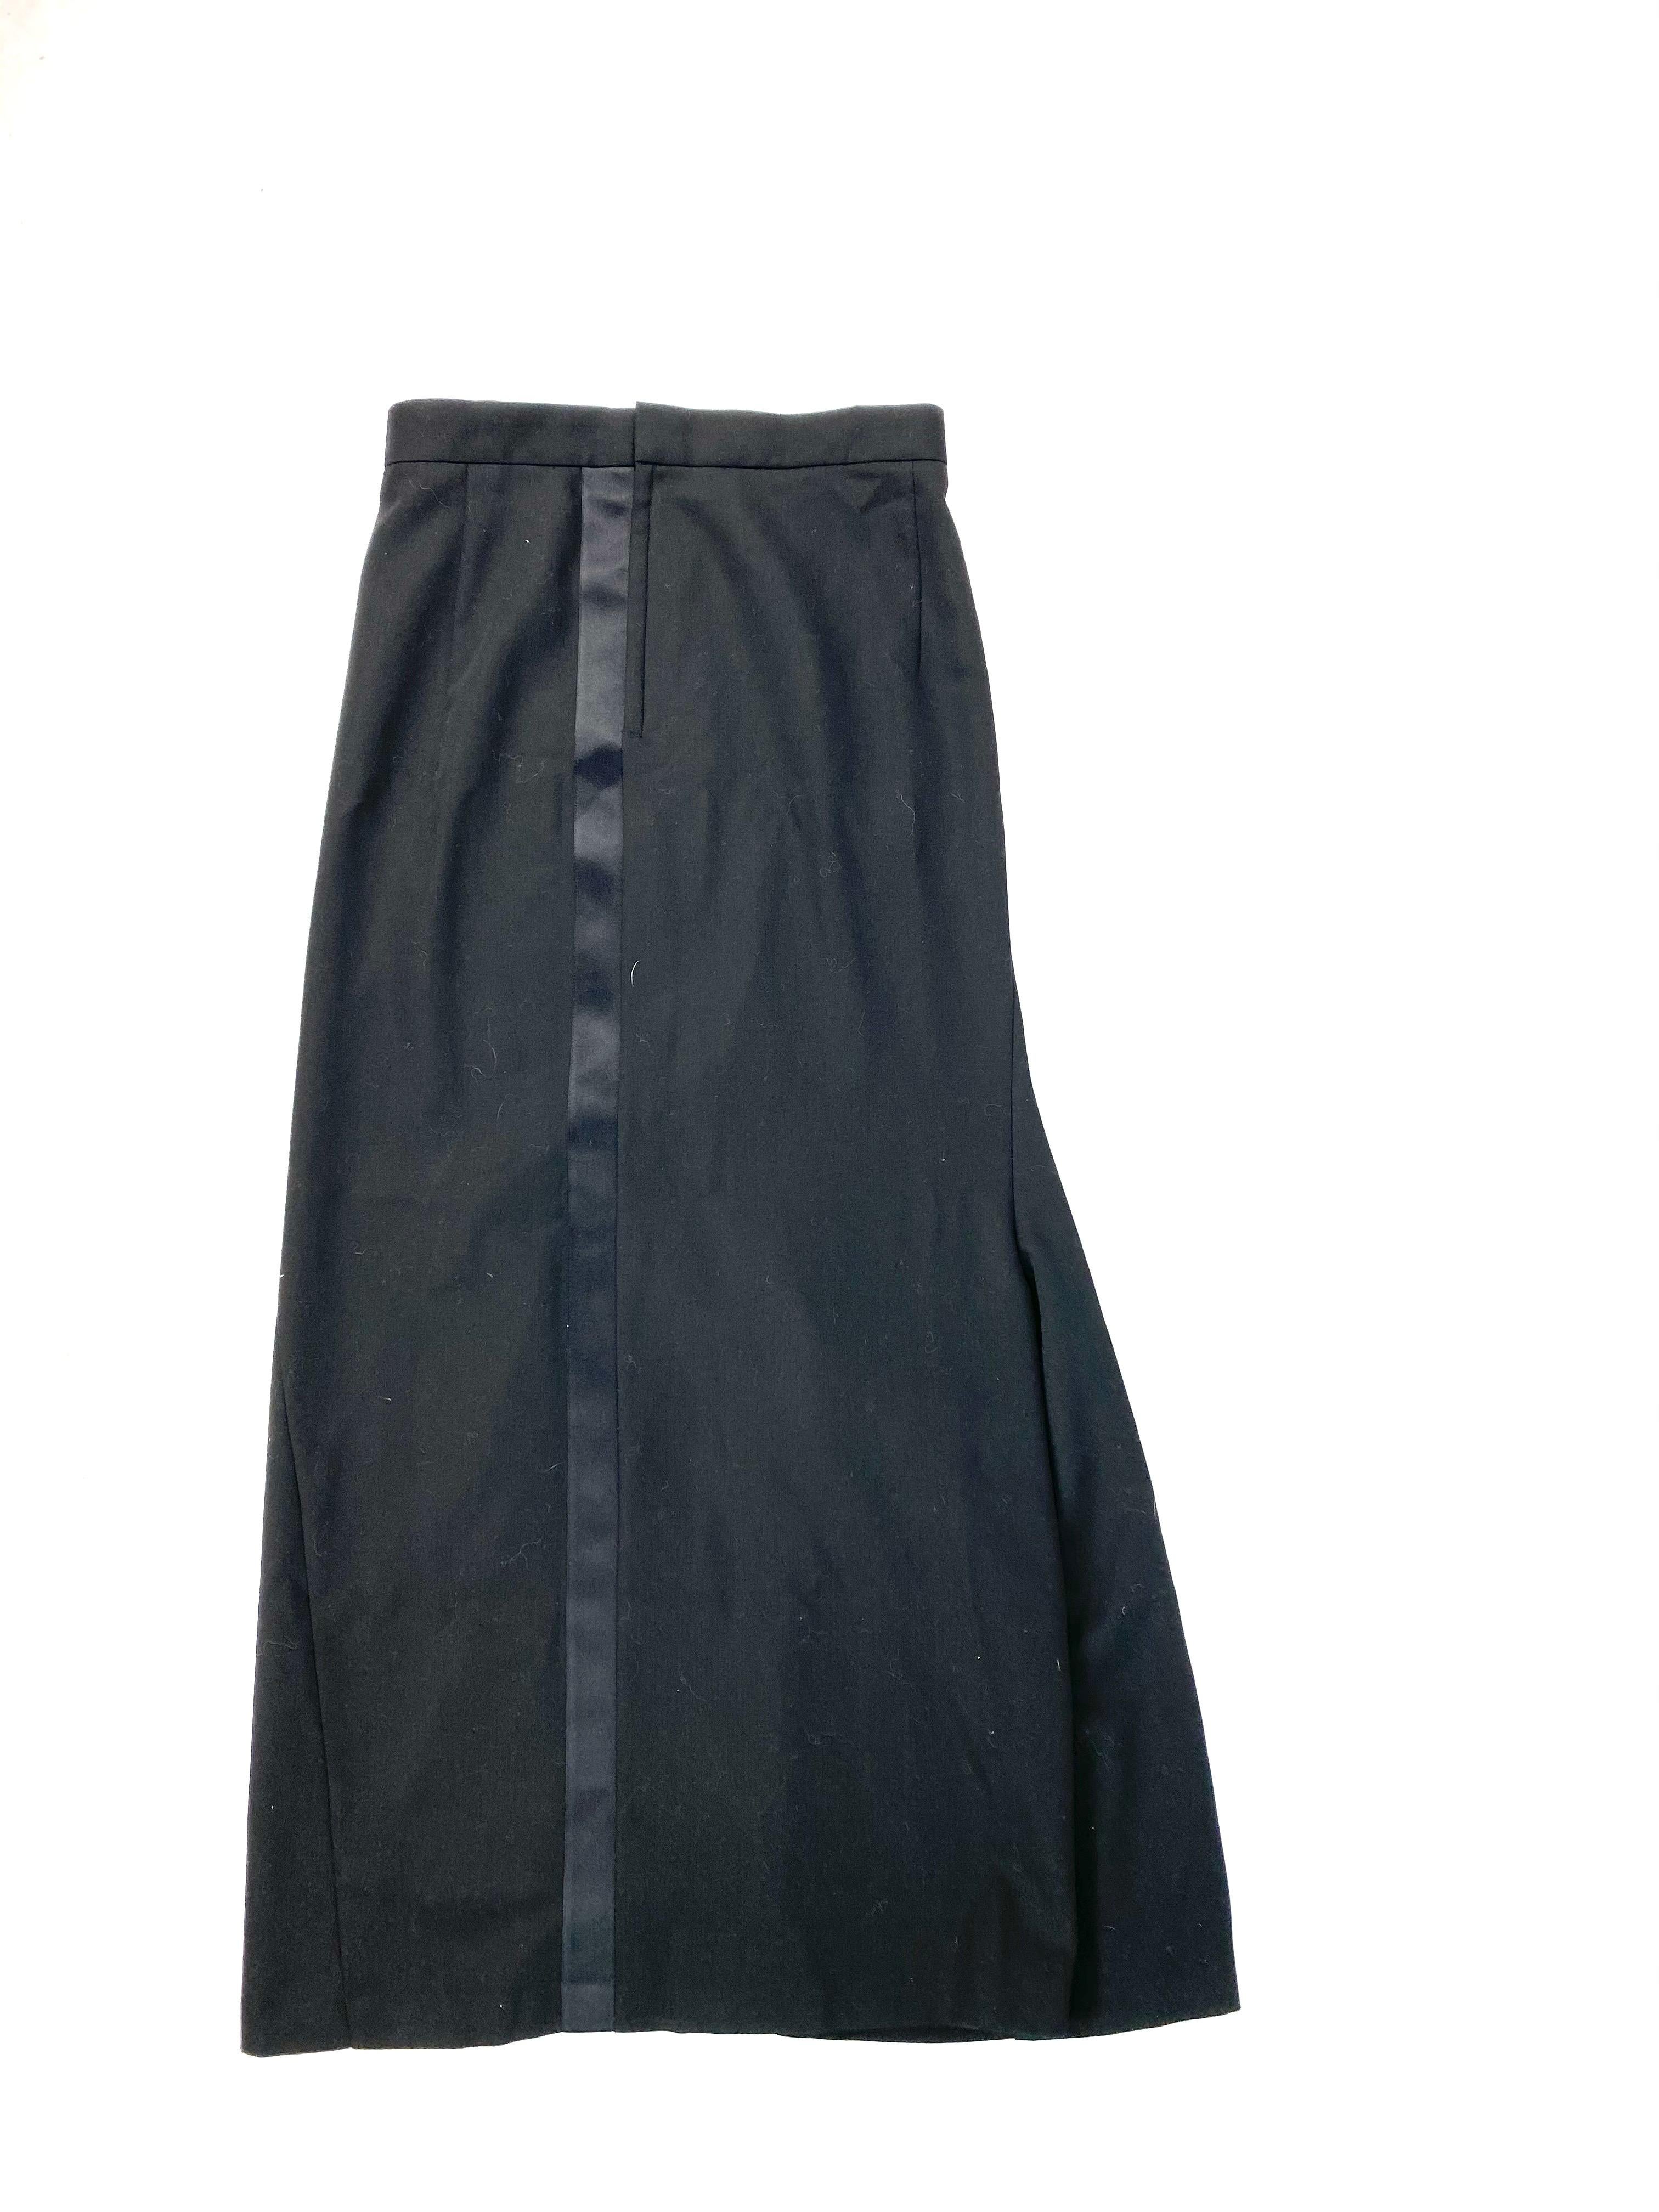 Junya Watanabe Comme des Garcons Black Skirt, Size Medium In Excellent Condition For Sale In Beverly Hills, CA